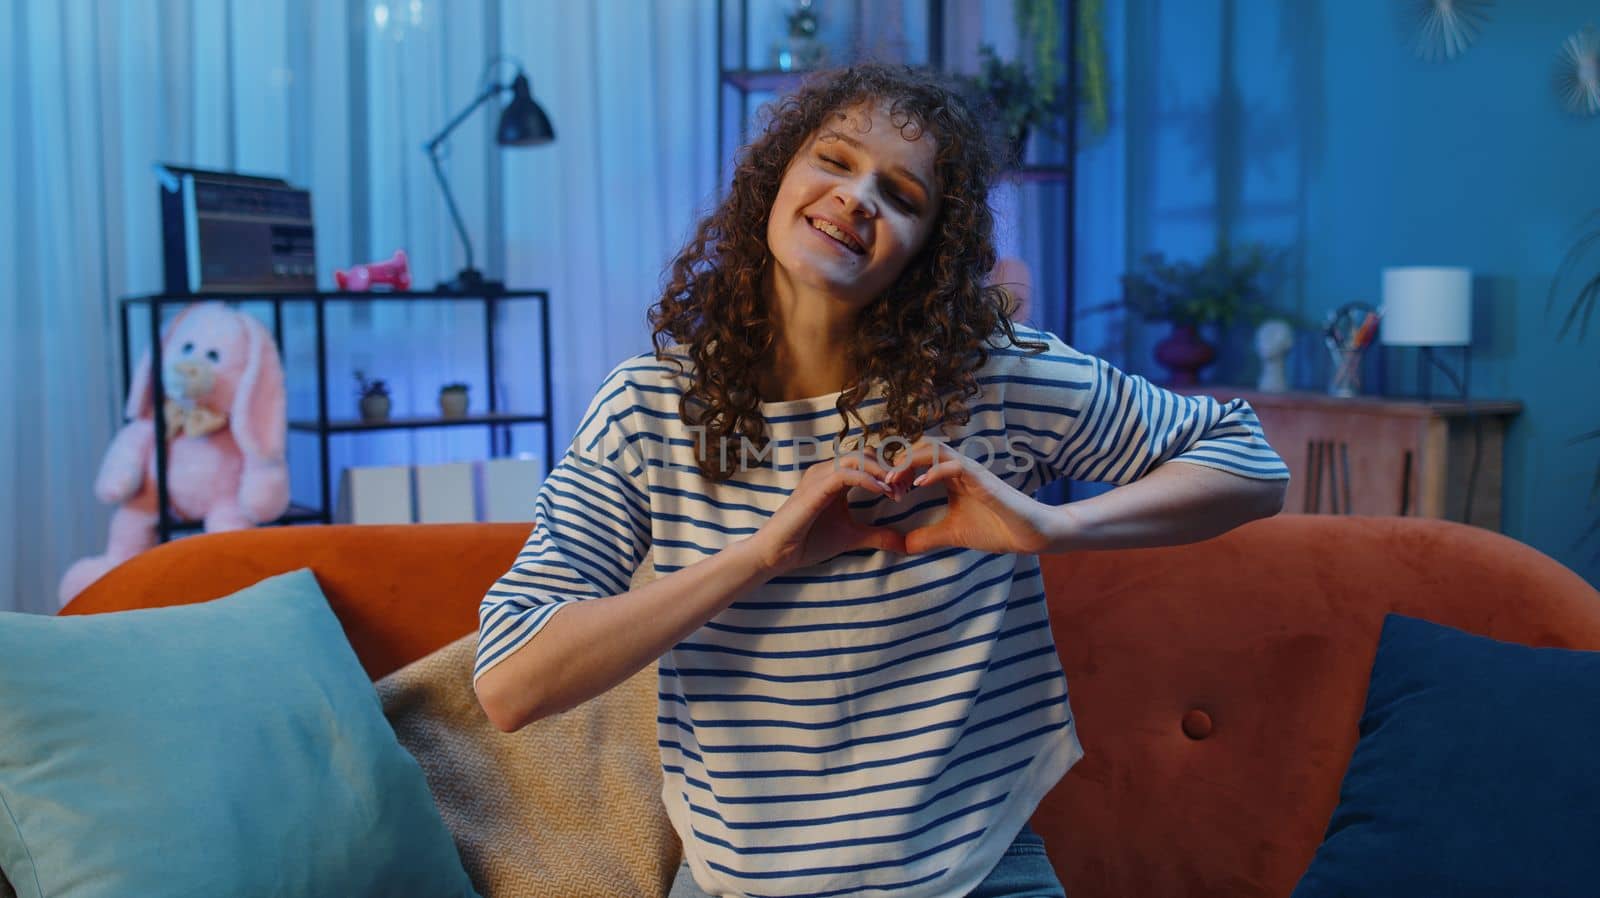 I love you. Happy woman with curly hairstyle at home couch makes symbol of love, showing heart sign to camera, express romantic feelings express sincere positive feelings. Charity, gratitude, donation